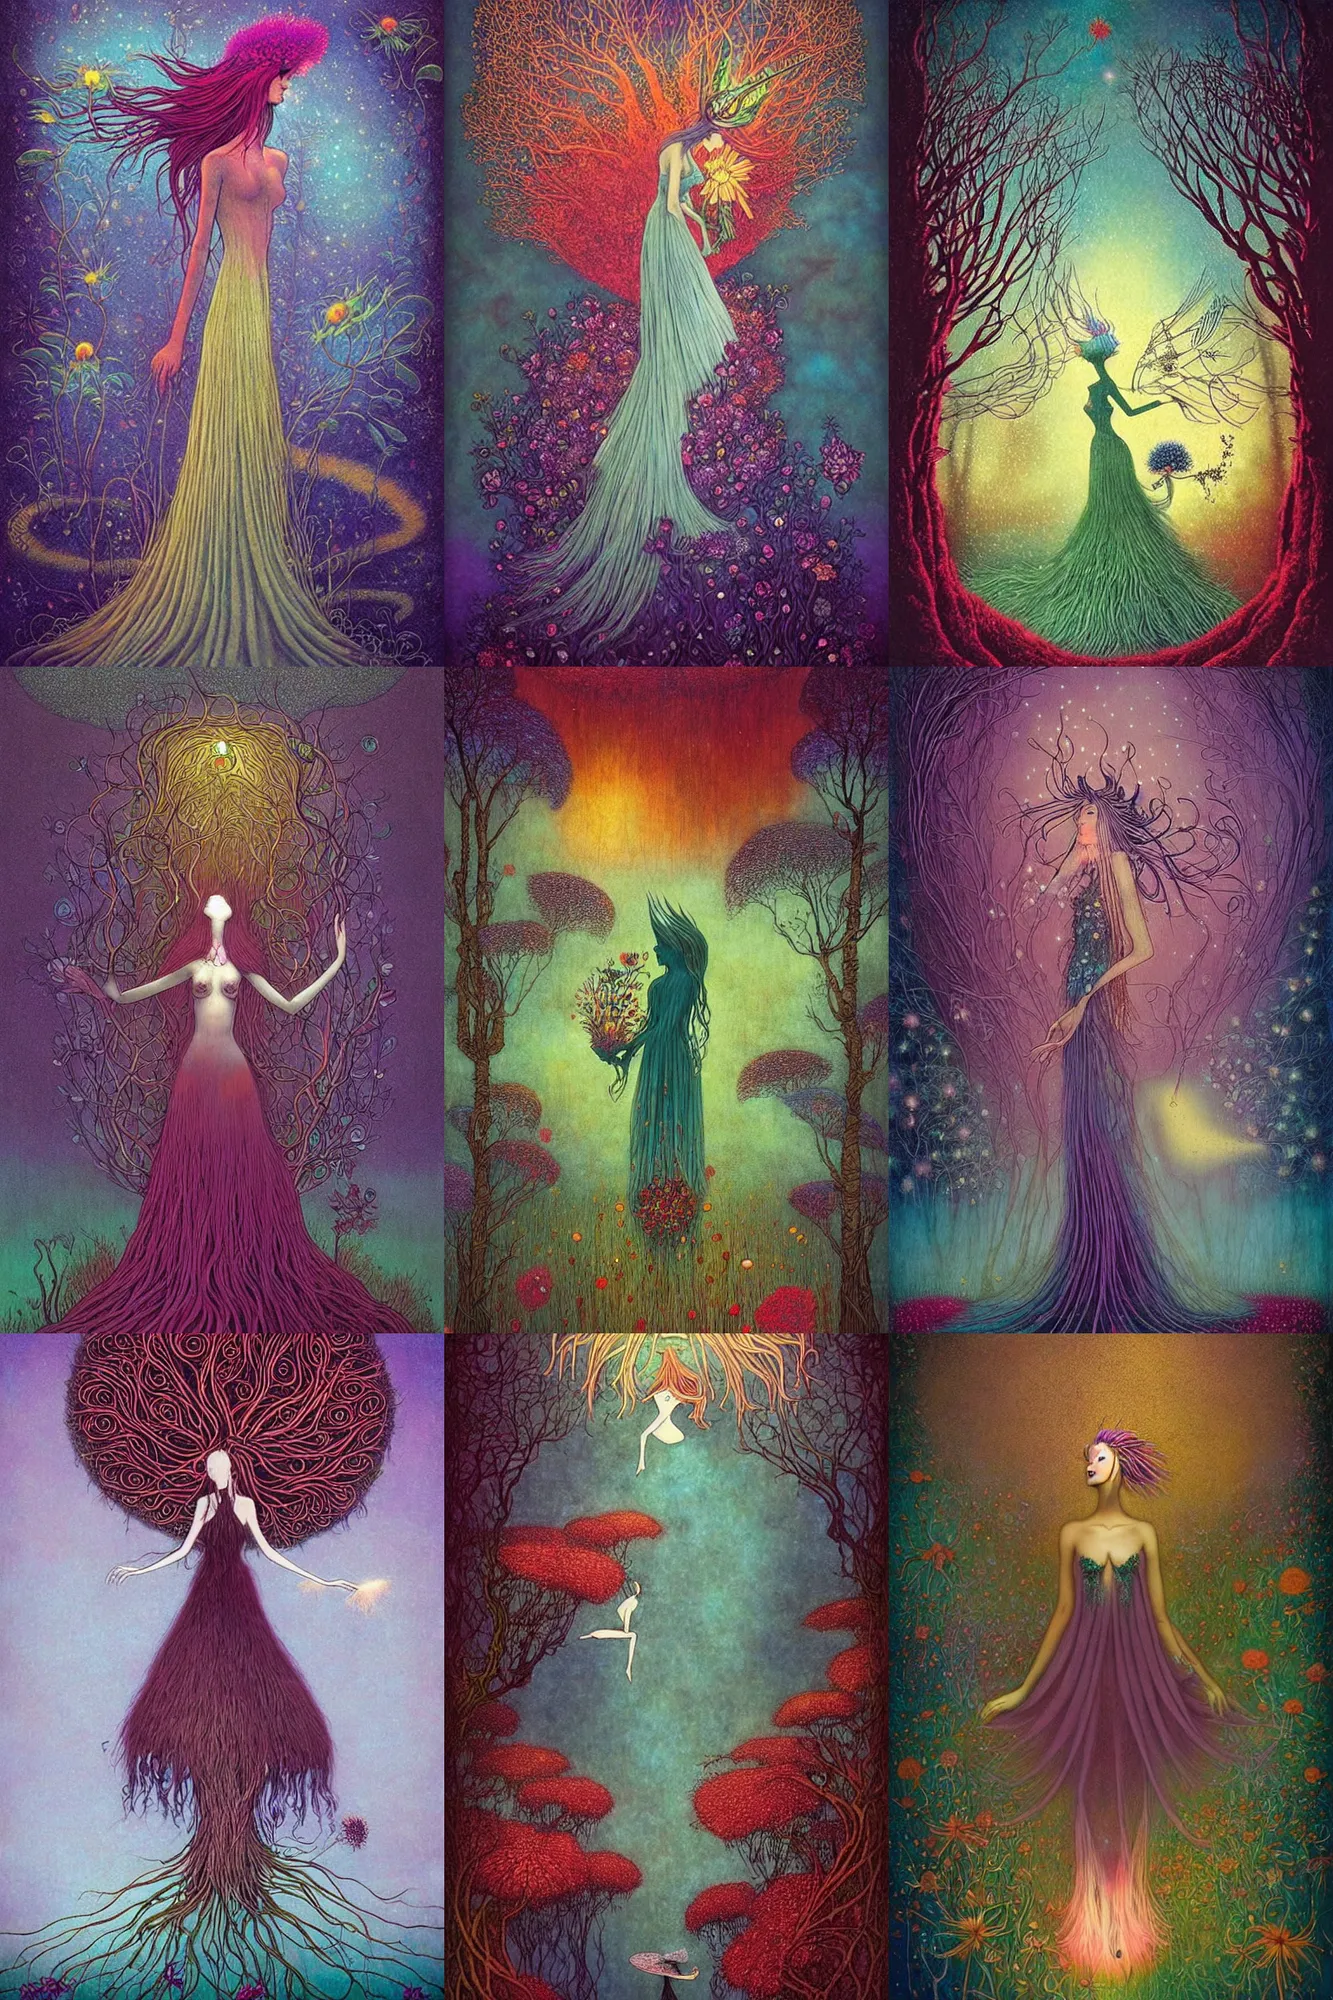 Prompt: surreal, Titania, Queen of the Fairies, nostalgia for a fairytale, magic realism, flowerpunk, mysterious, vivid colors, magic realism. by andy kehoe, amanda clarke, by moebius.